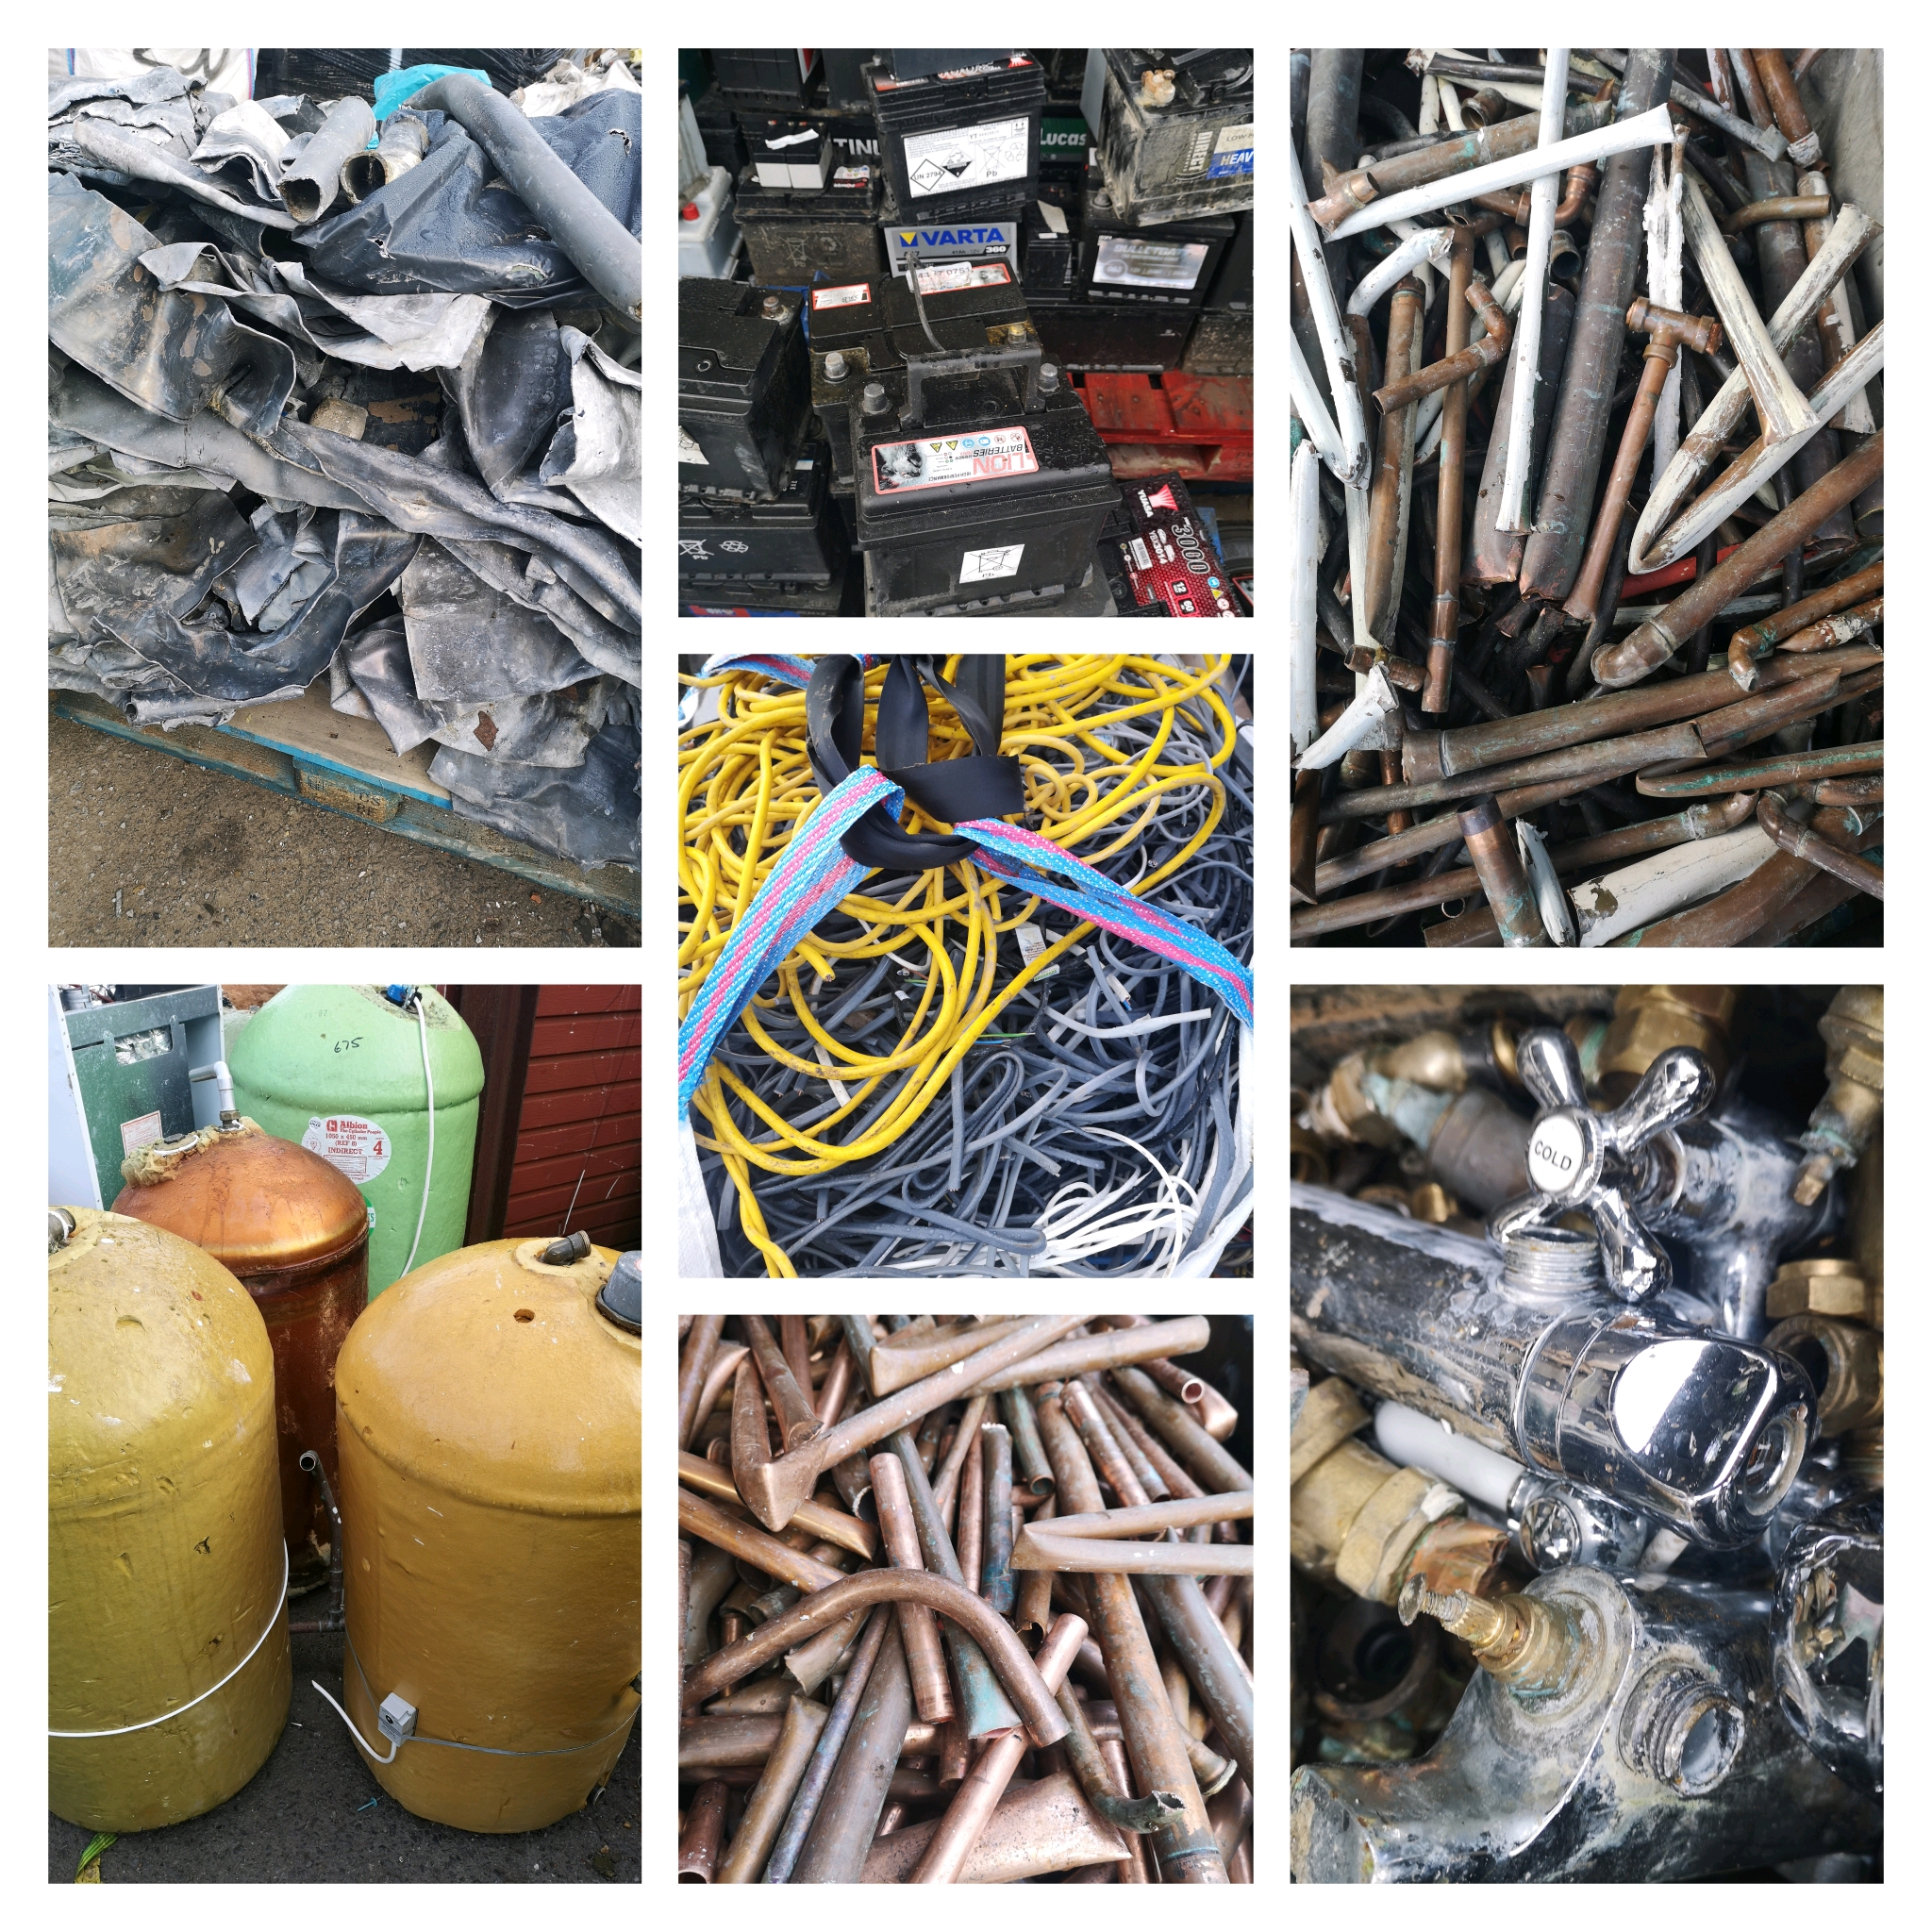 Brass Recycling - We buy,process and recycle all grades of brass